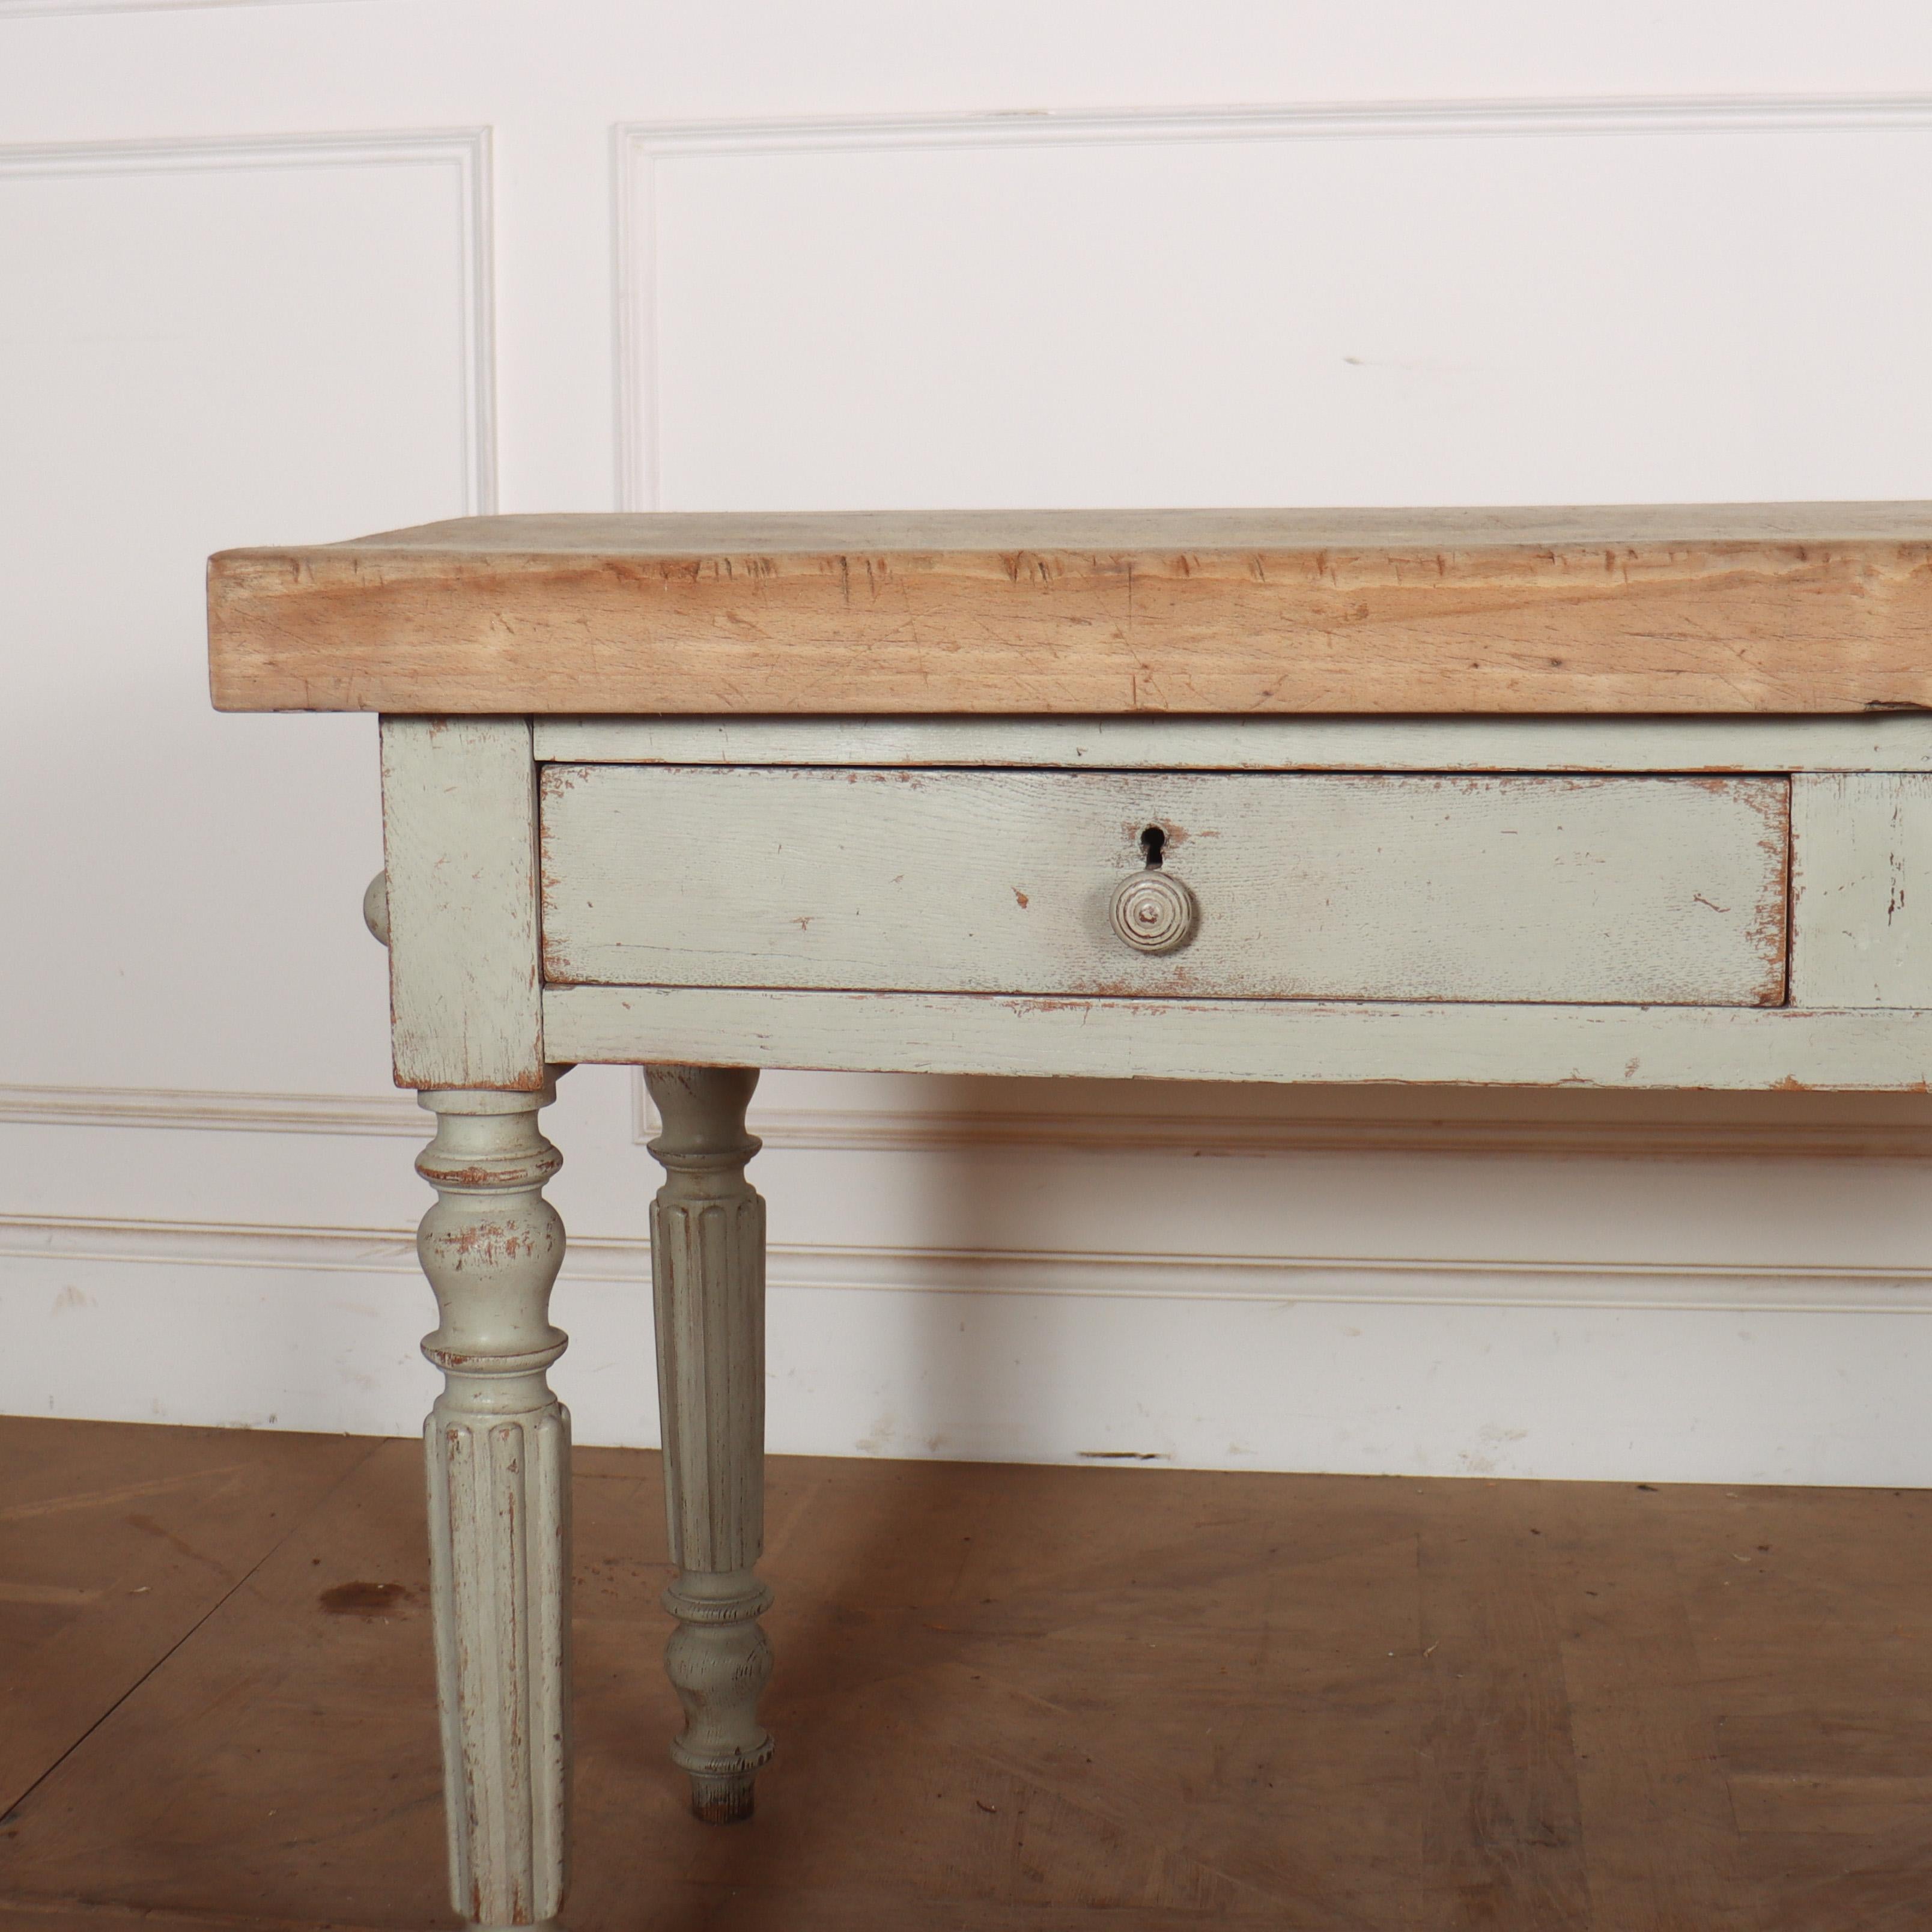 19th C French butchers table with two drawers and a 7cm thick top. 1880.

Reference: 8271

Dimensions
53.5 inches (136 cms) Wide
24 inches (61 cms) Deep
31 inches (79 cms) High